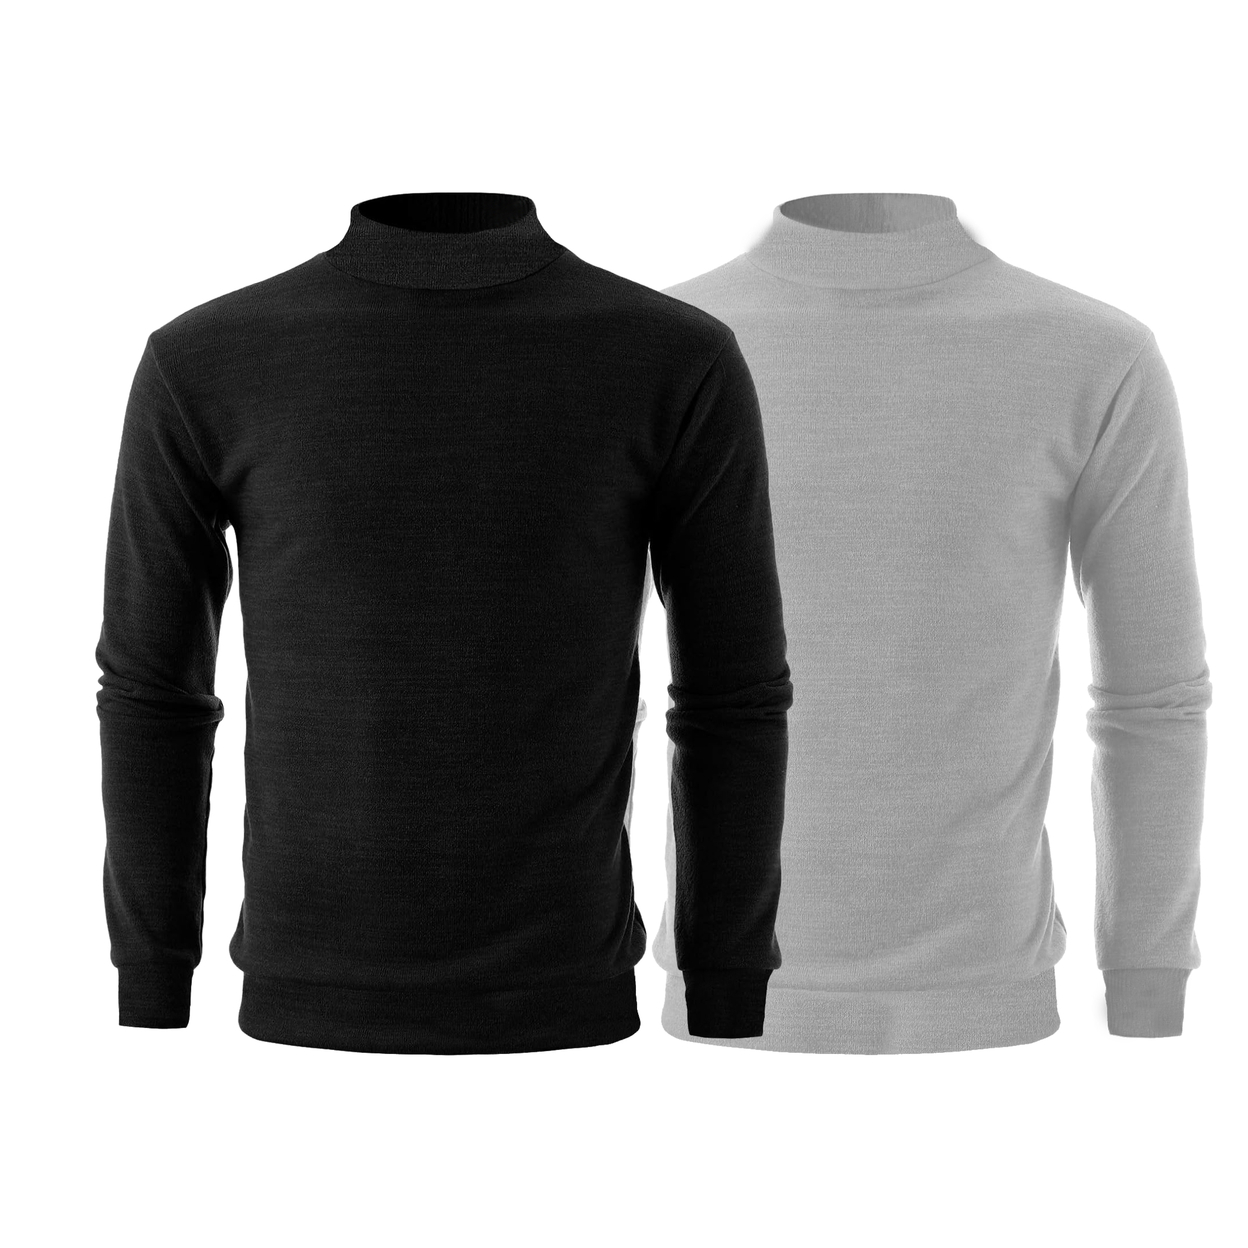 2-Pack: Men's Winter Warm Cozy Knit Slim Fit Mock Neck Sweater - White & White, Small